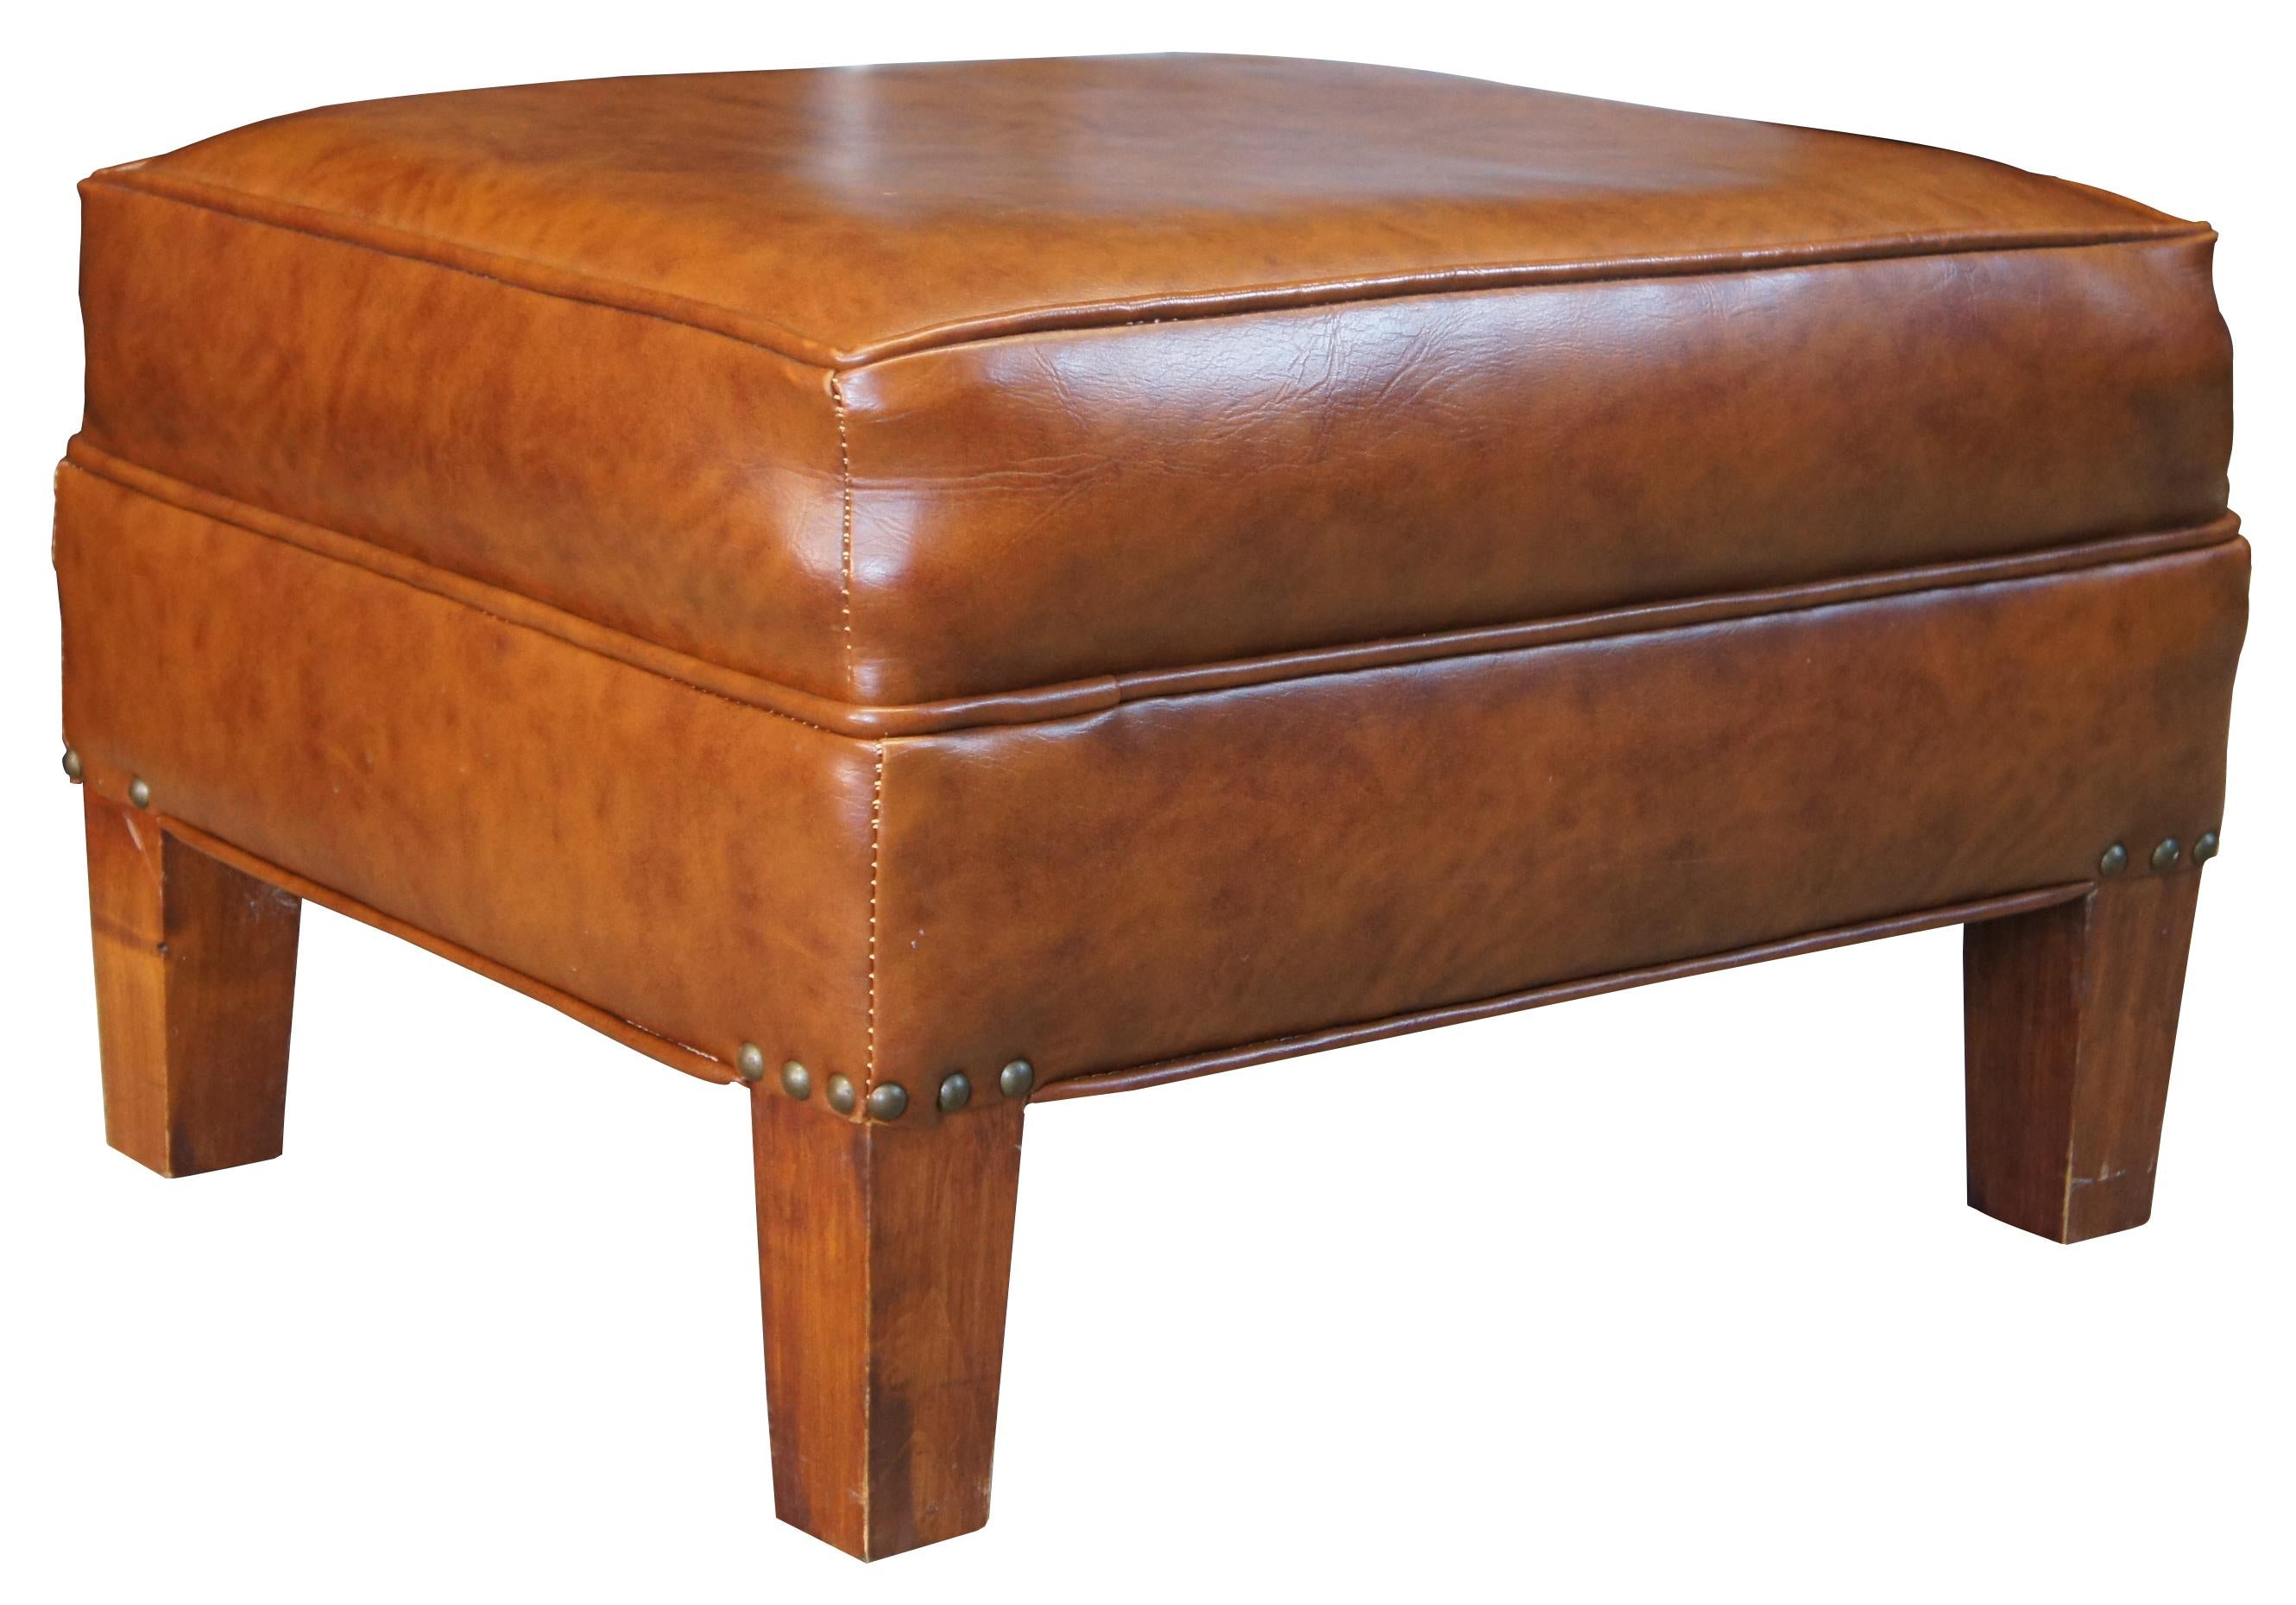 Retro light brown leather ottoman, circa 1960s. Rectangular form with square tapered legs.